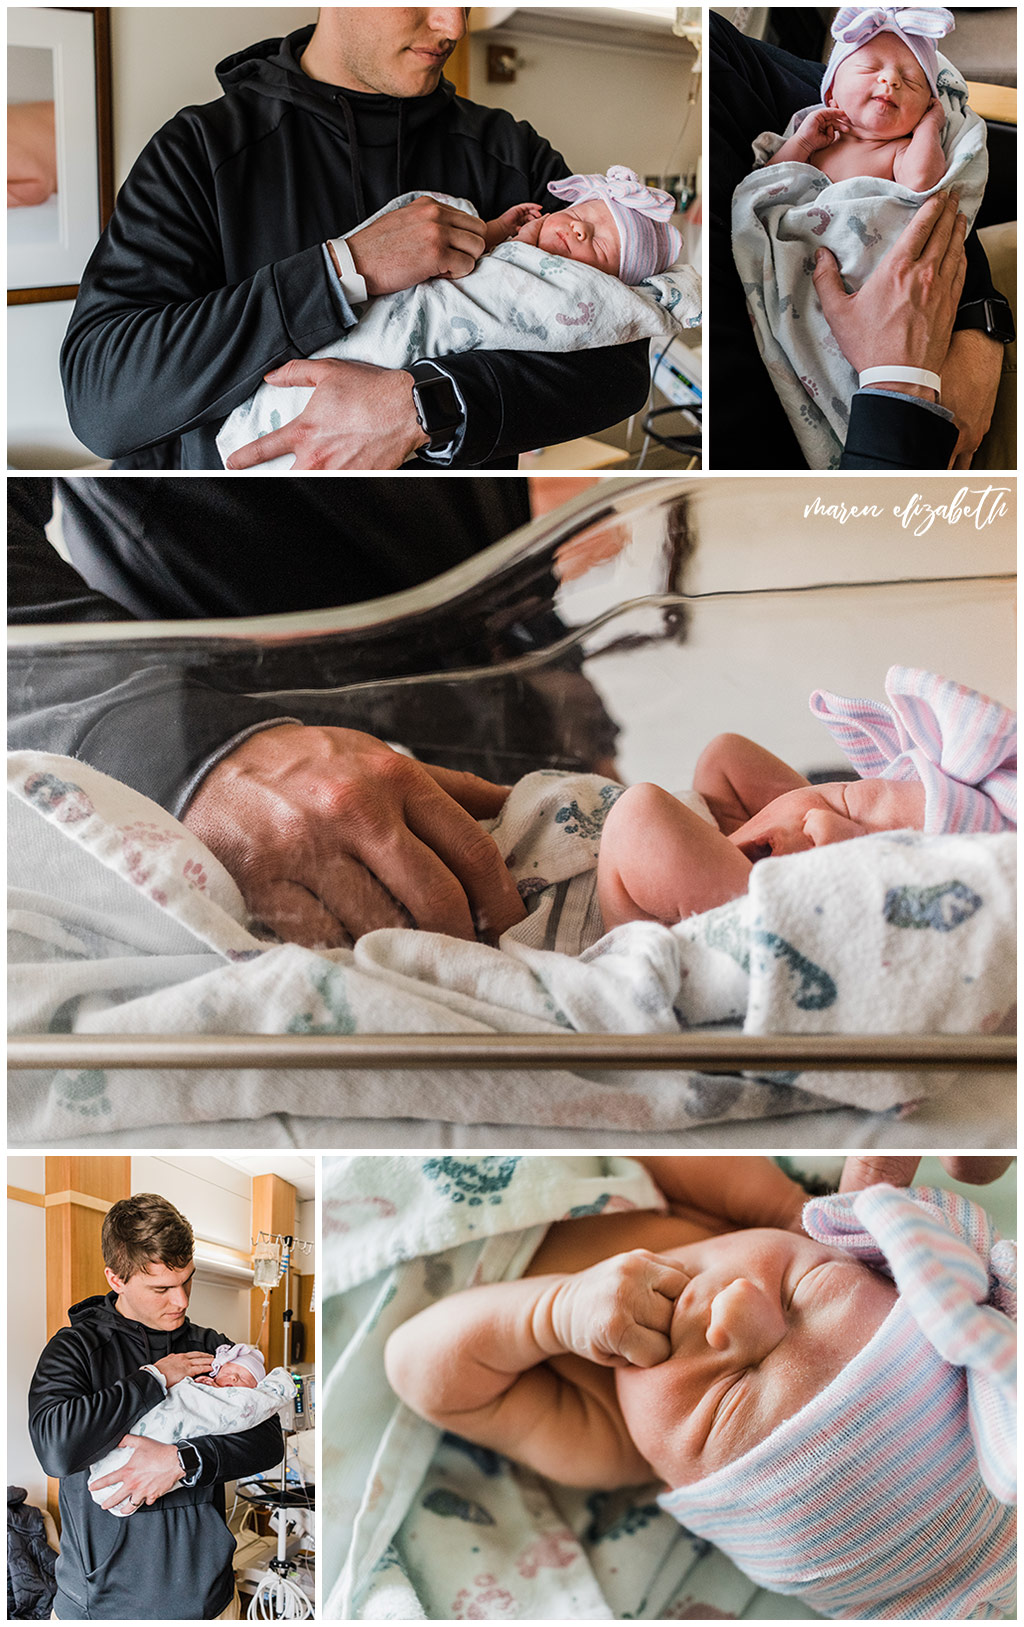 Fresh 48 Pictures at American Fork Hospital in Utah minutes after Baby M's birth. Maren Elizabeth Photography | Arizona Photographer. 